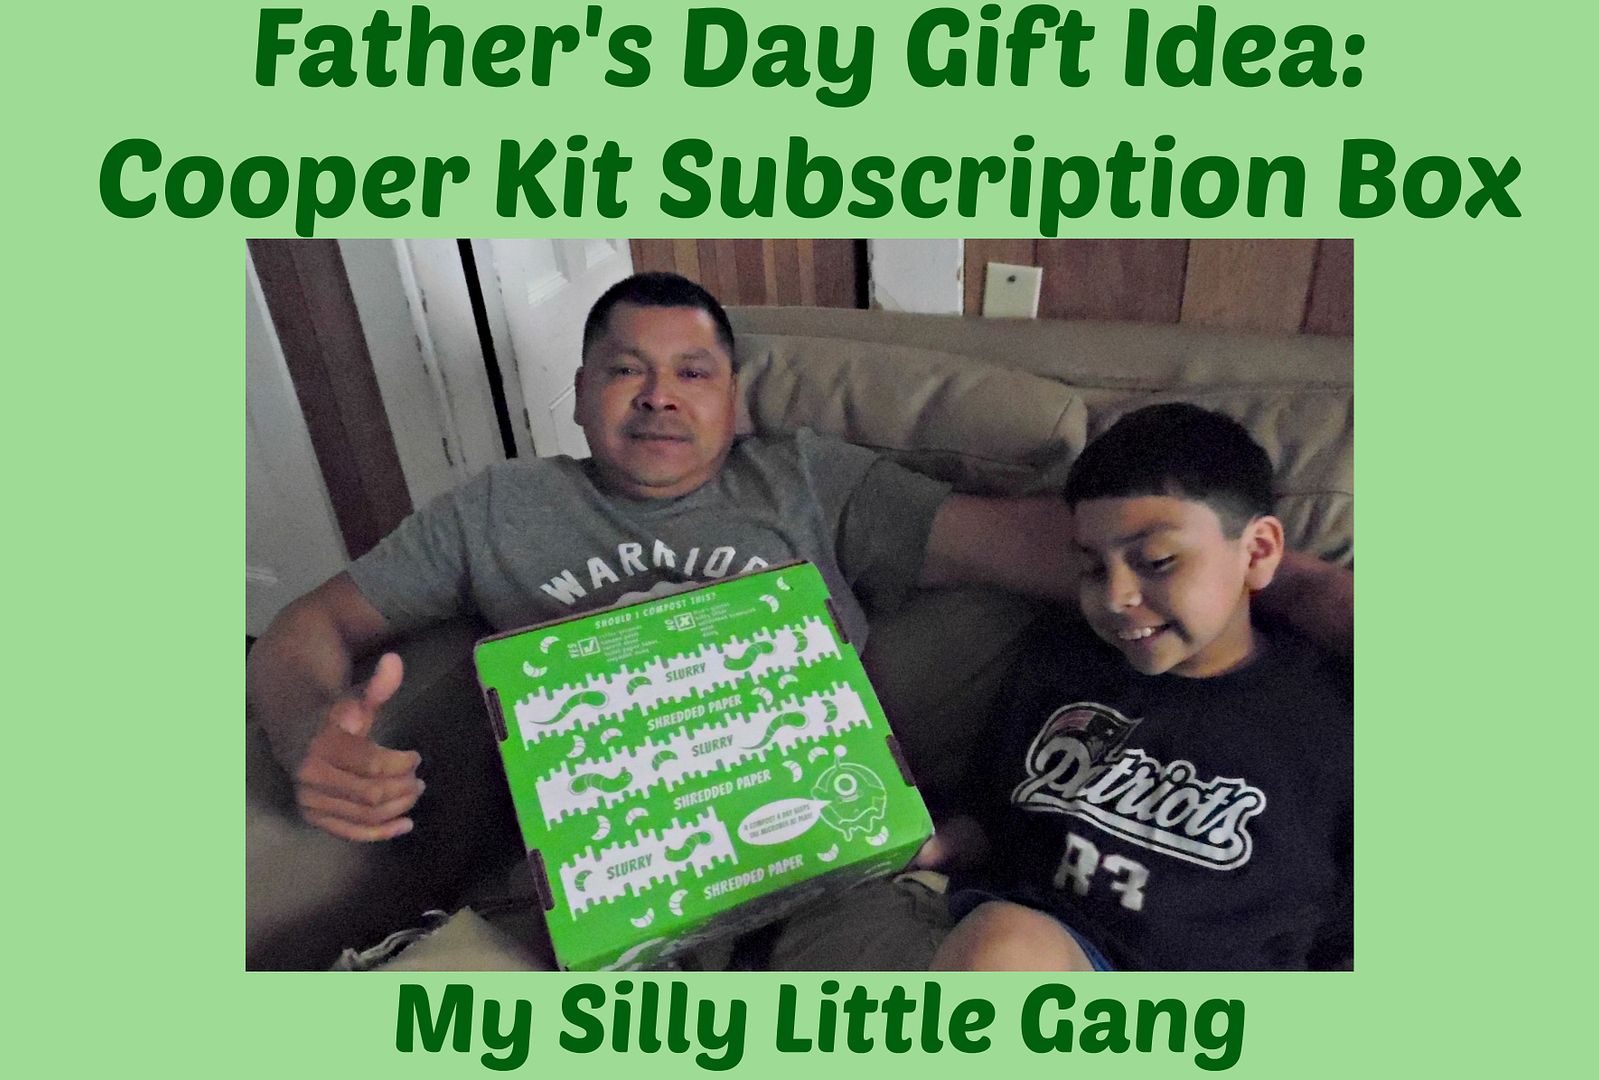 cooper kit subscription box father's day gift idea